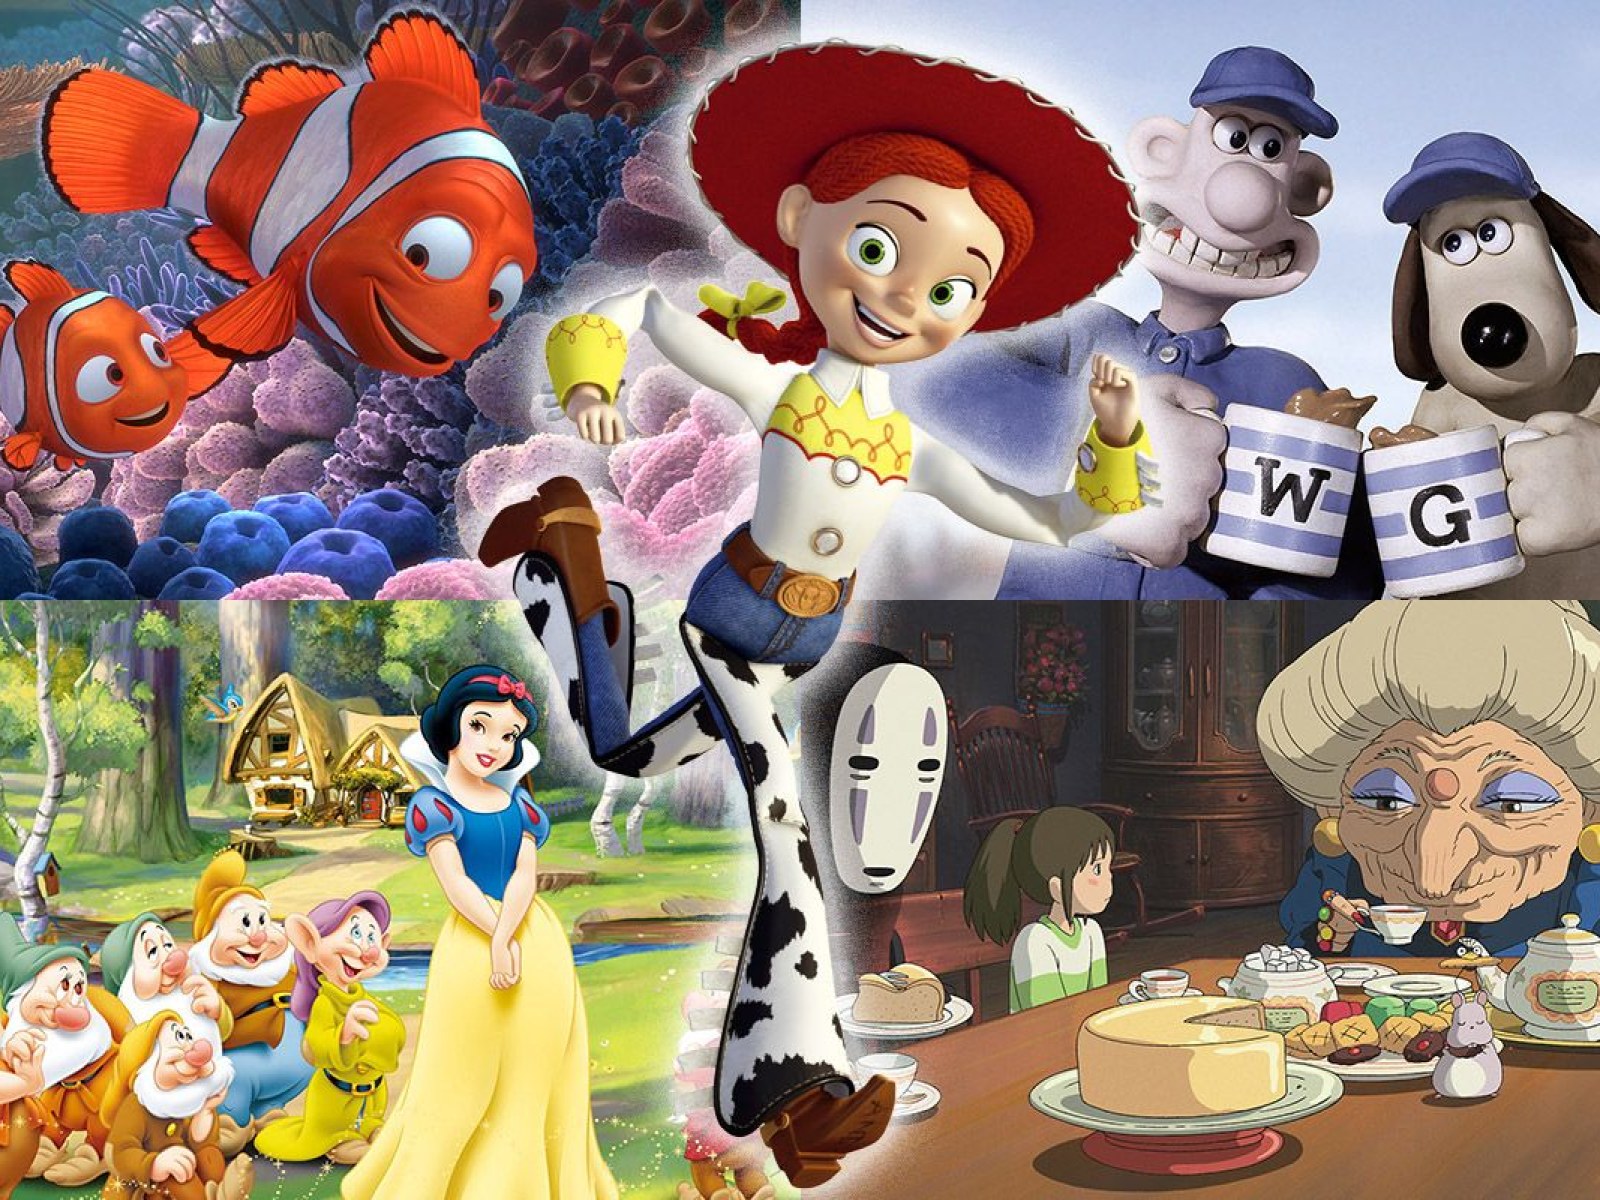 The Best Animated Movies Ever Made, According to Critics